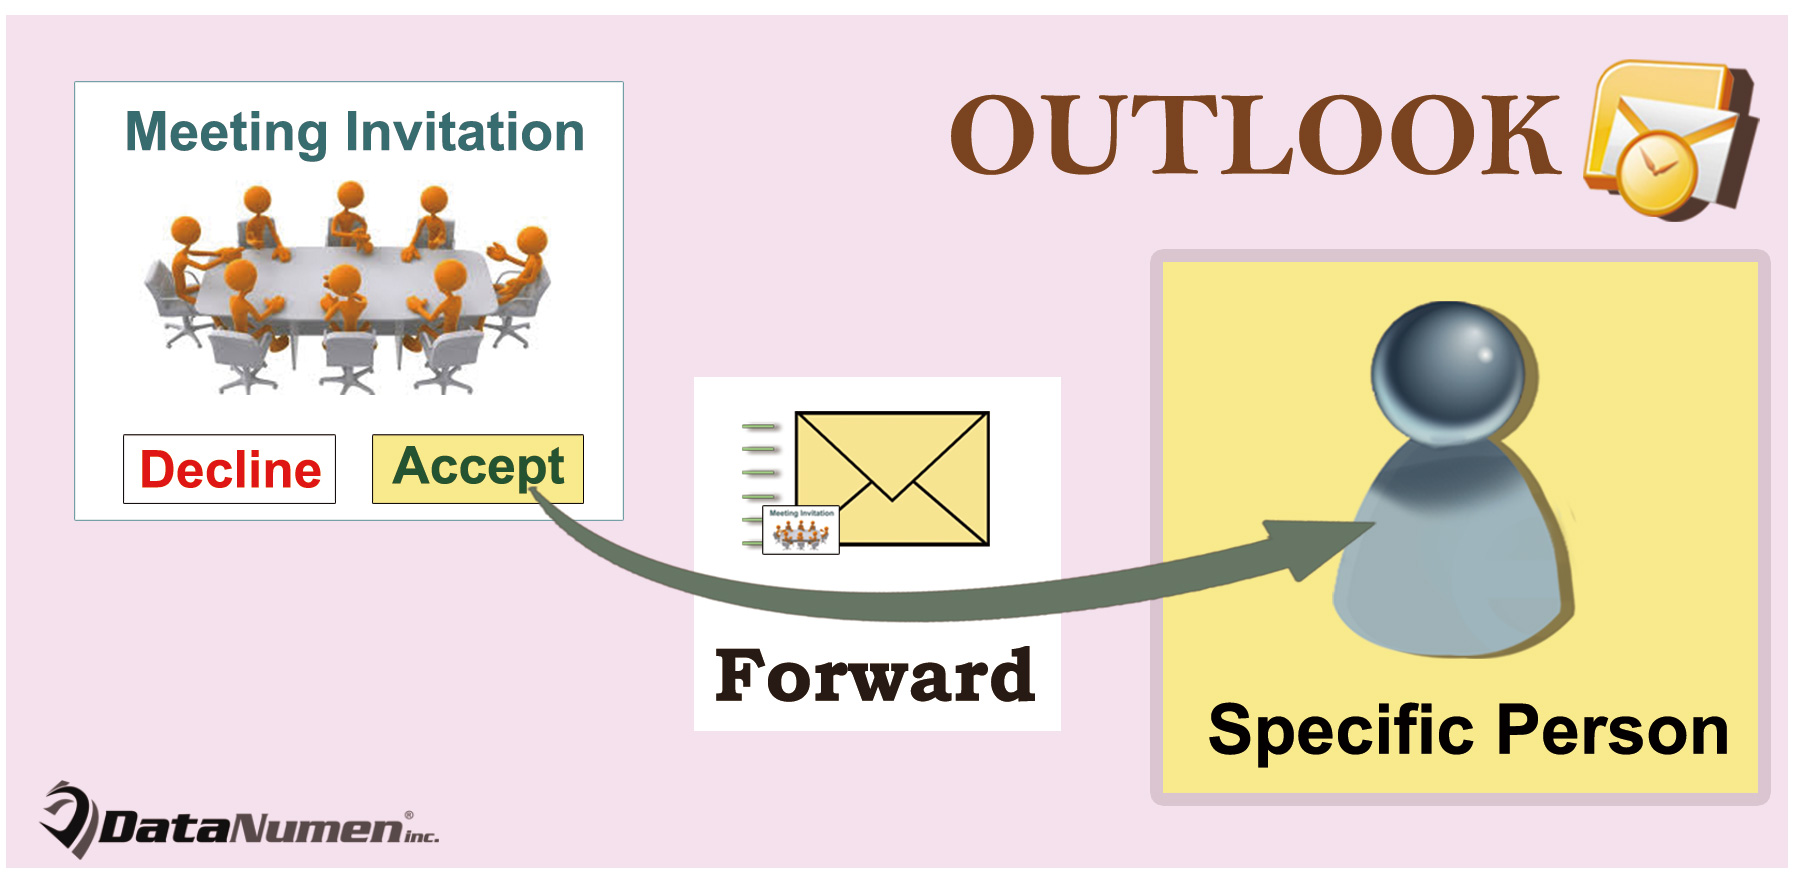 Auto Forward a Meeting Invitation to a Specific Person when Accepting